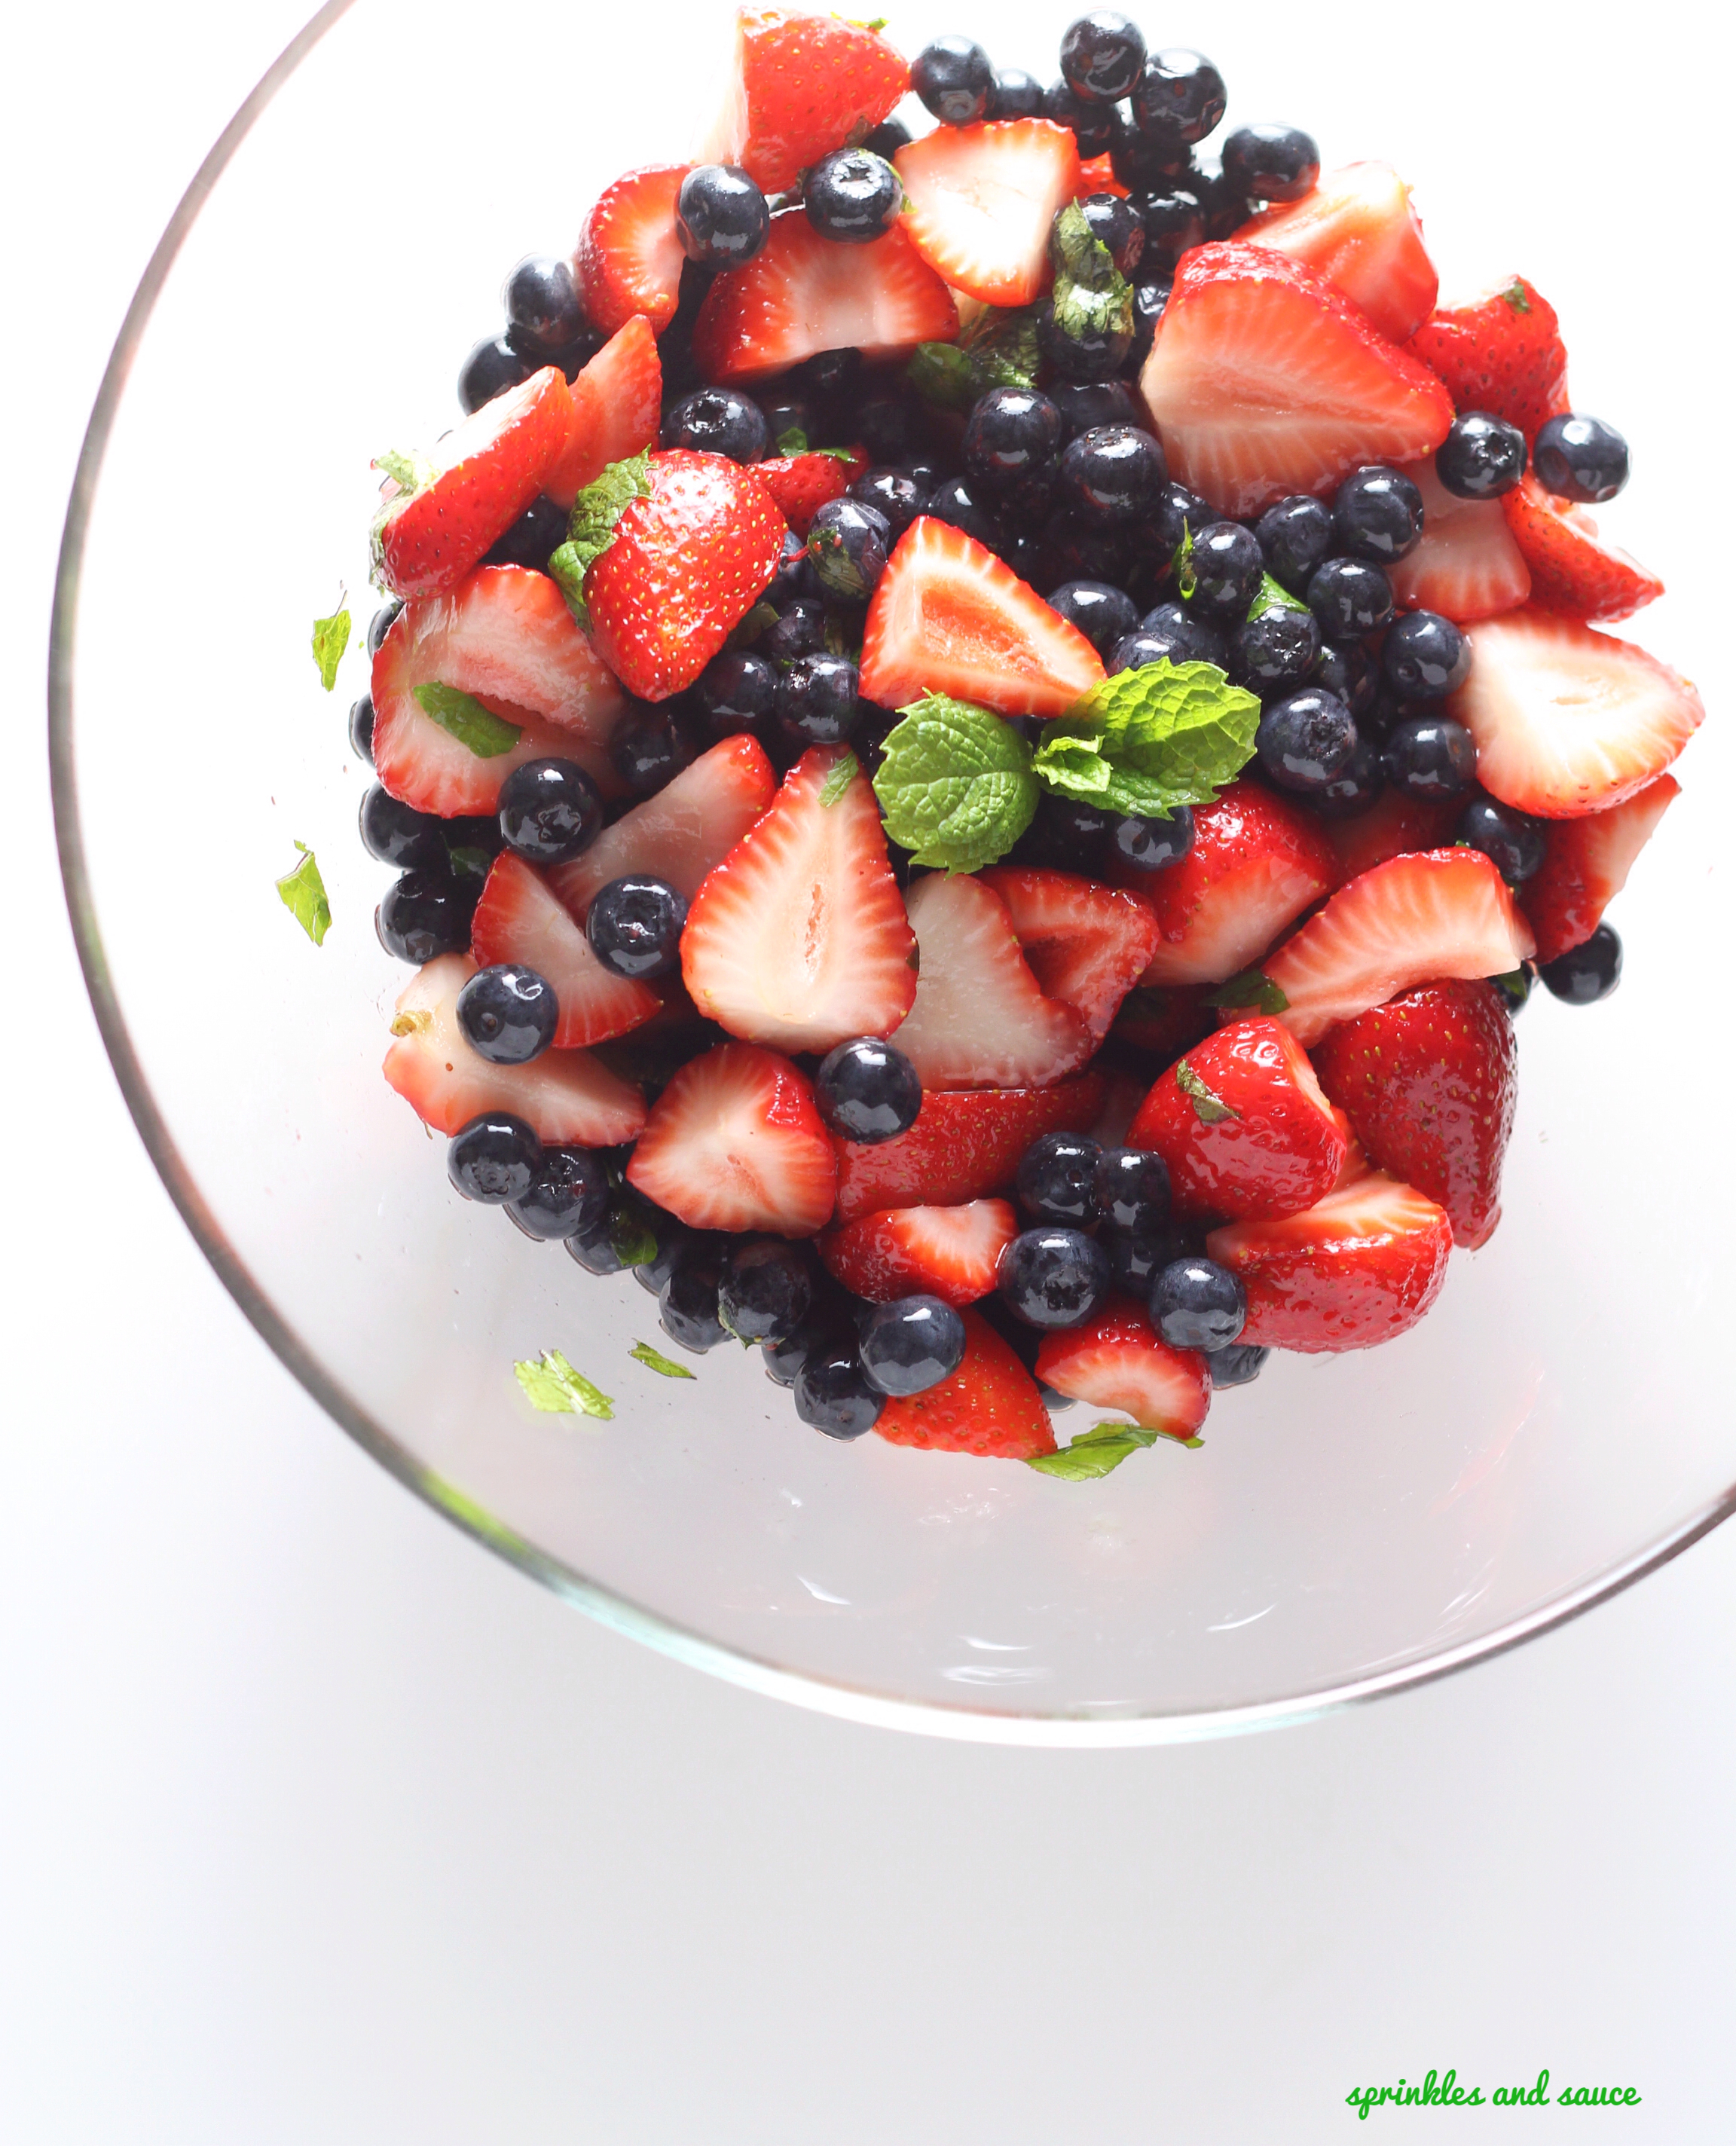 Strawberry and Blueberry Fruit Salad with Honey, Mint and Brandy Syrup